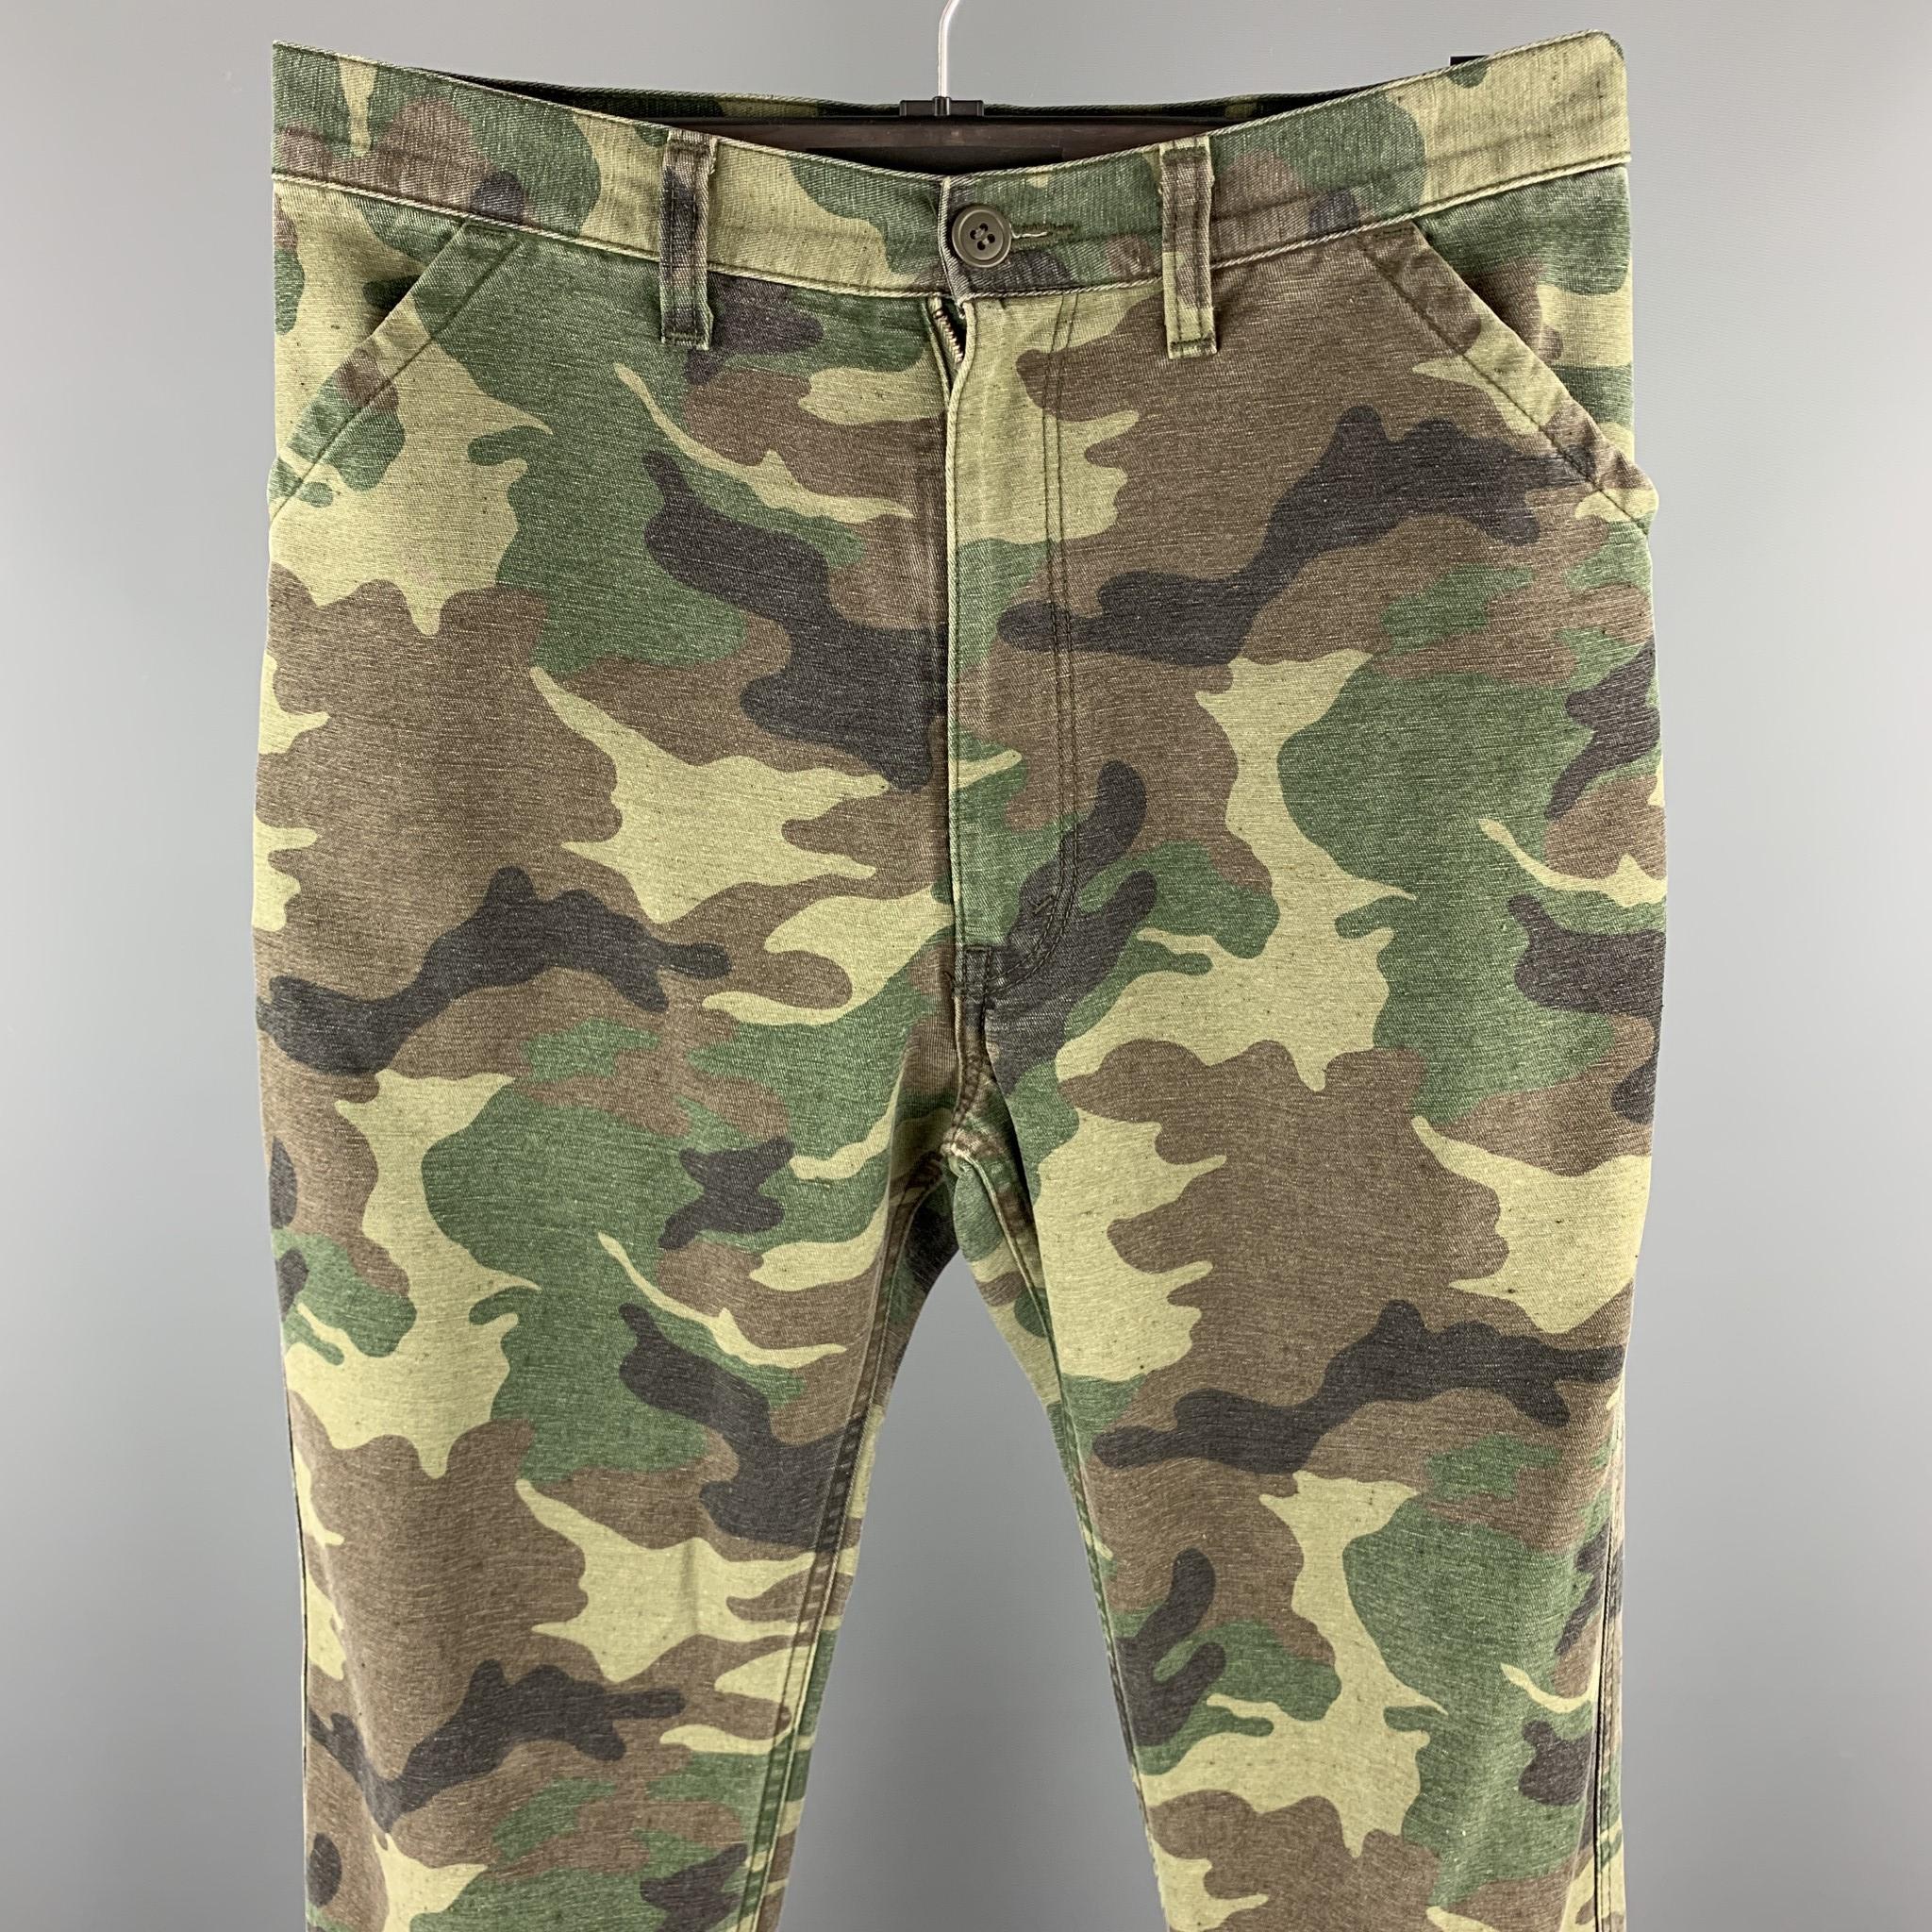 JUNYA WATANABE pants comes in a olive camouflage rayon blend featuring a cropped style, back patch pockets, back belt, and a zip fly closure. Made in Japan.

Excellent Pre-Owned Condition.
Marked: JP XS / AD2010

Measurements:

Waist: 32 in. 
Rise: